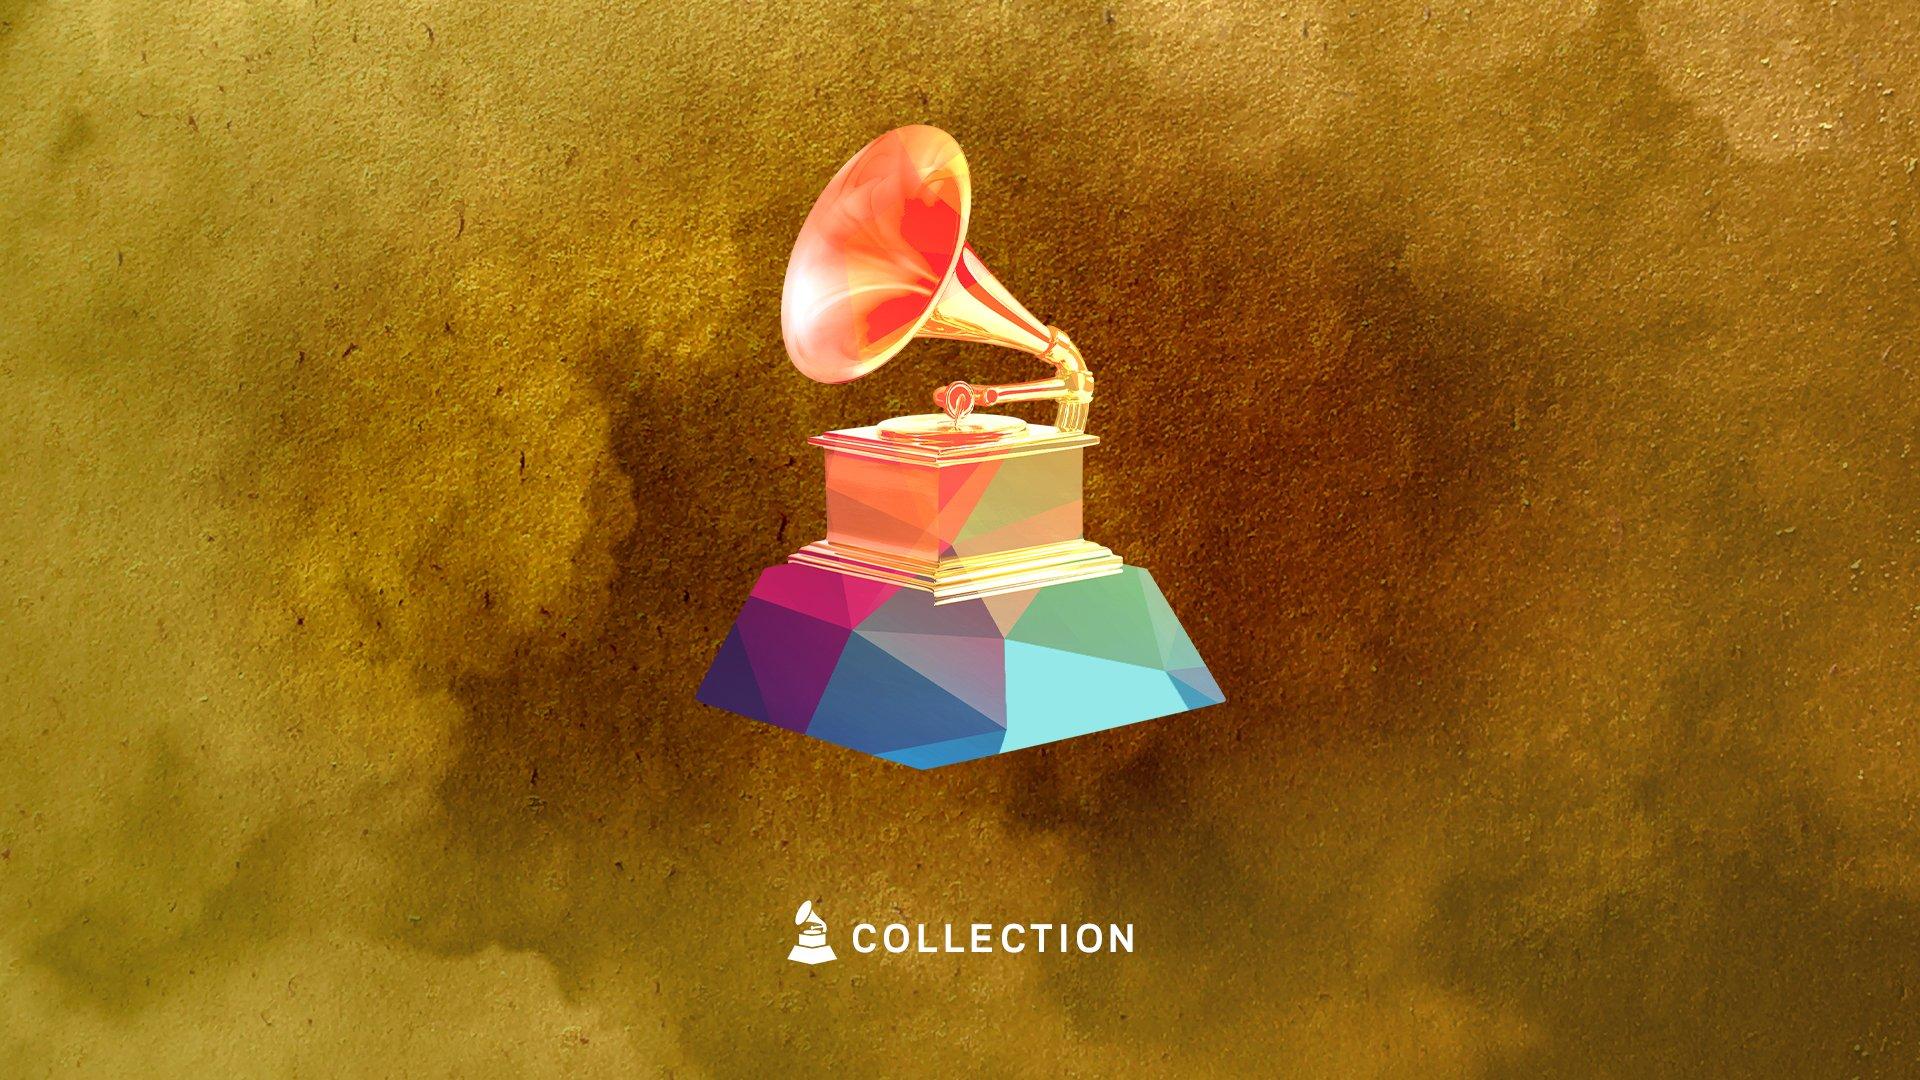 Artwork for 63rd GRAMMY Awards Collection